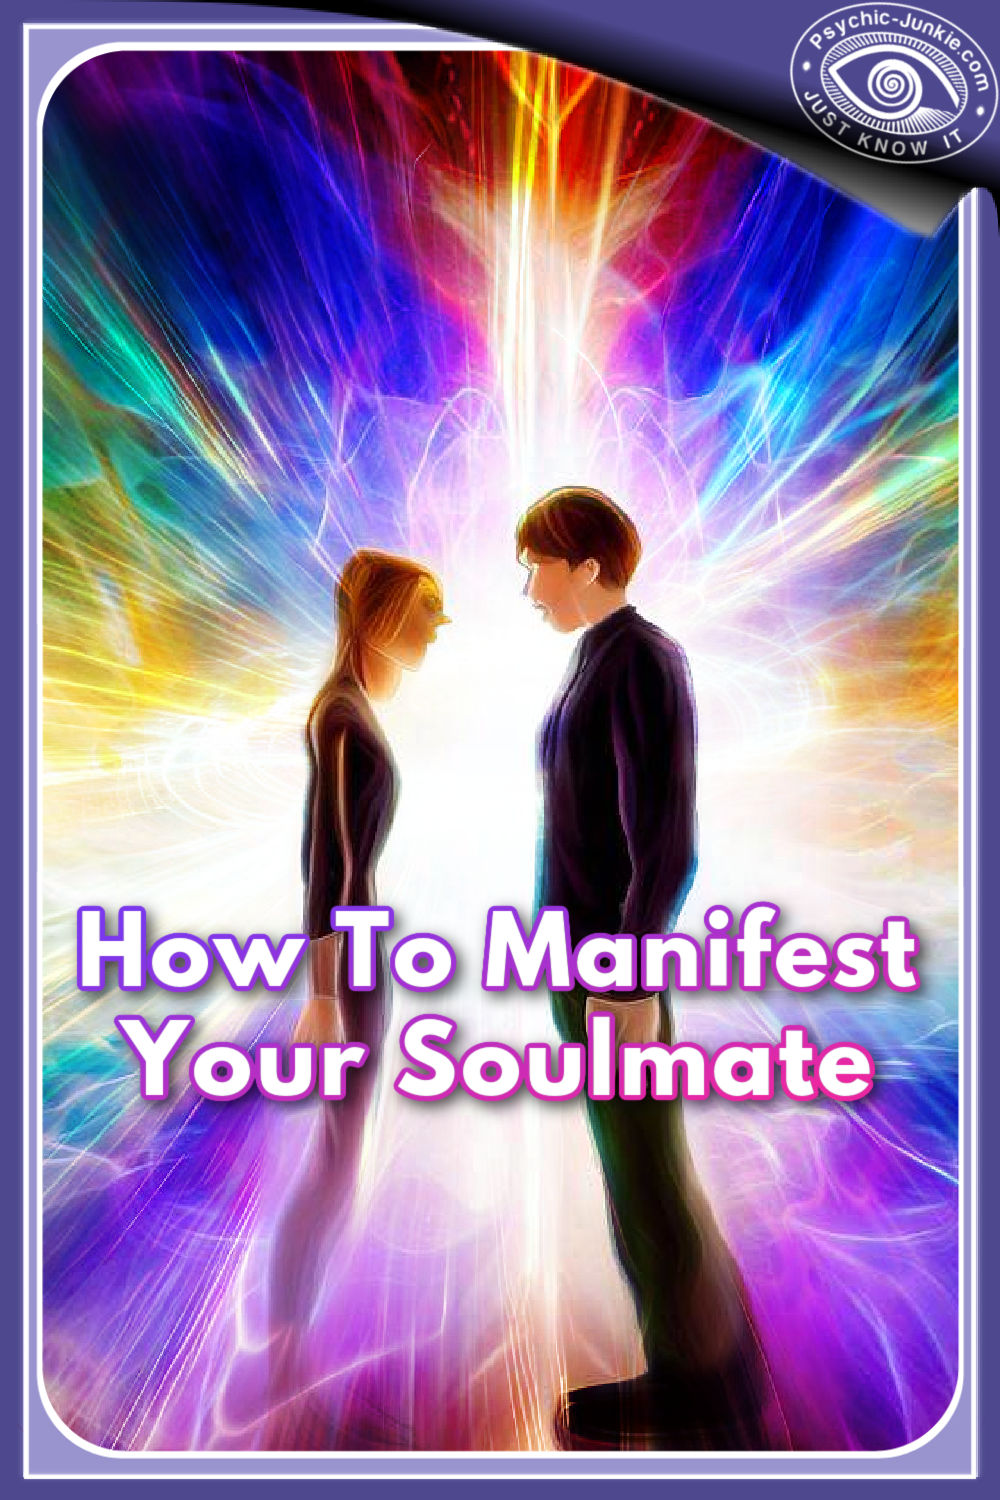 How To Manifest Your Soulmate - Miracle 7 Day Plan